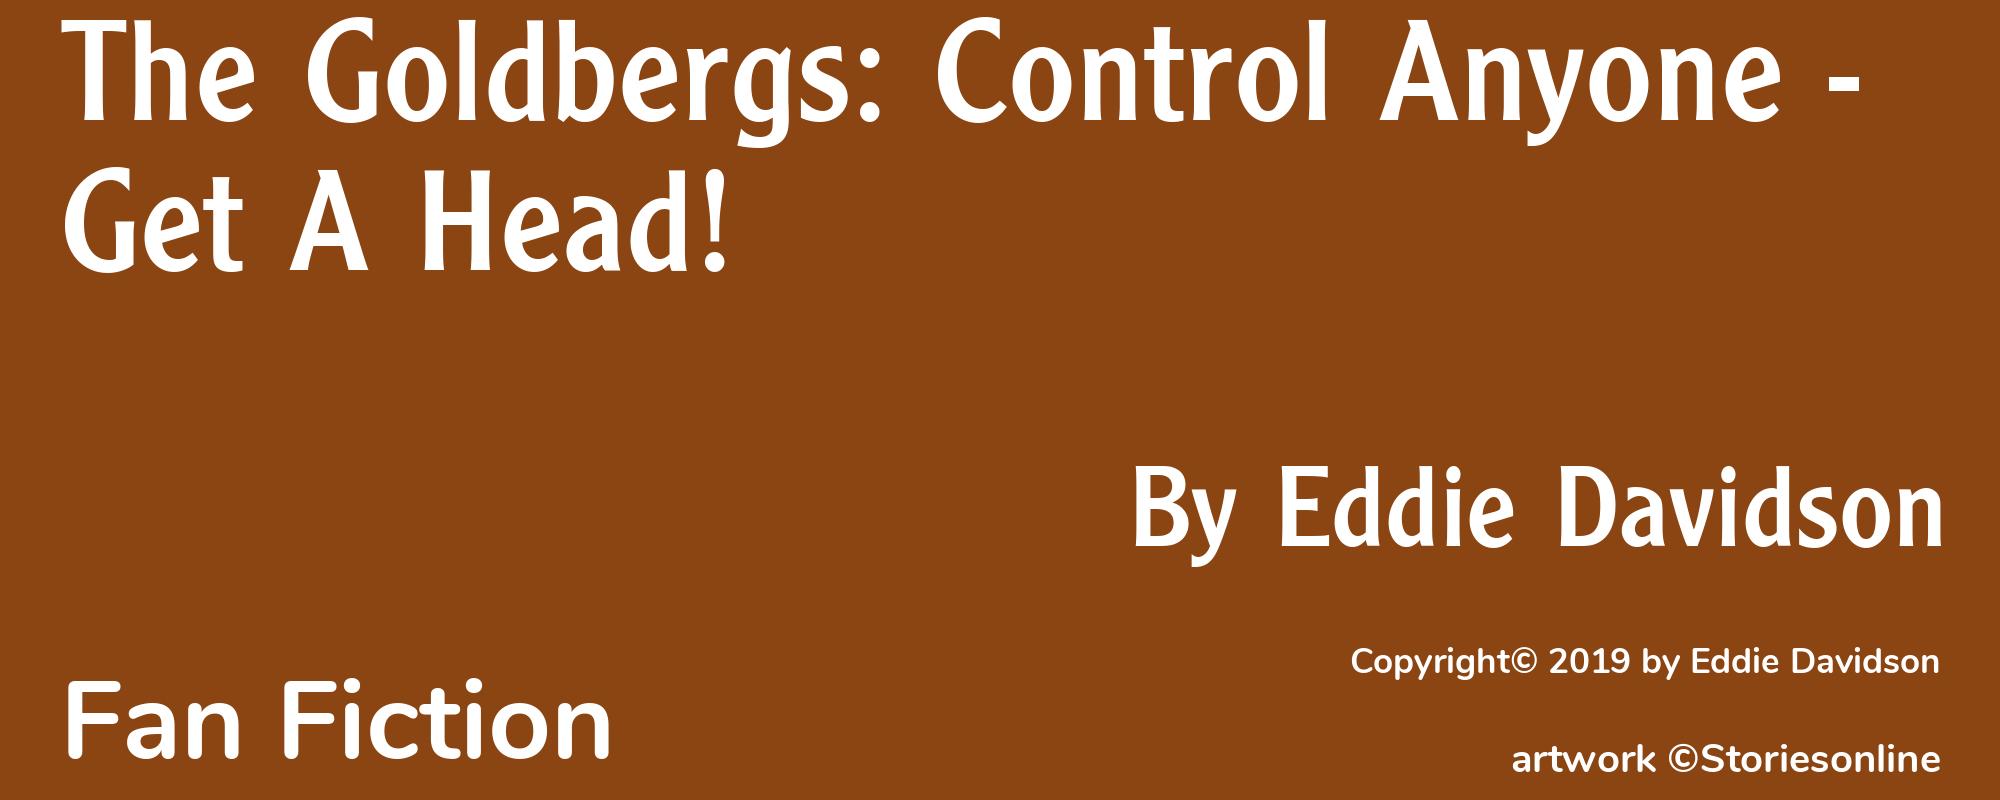 The Goldbergs: Control Anyone - Get A Head! - Cover